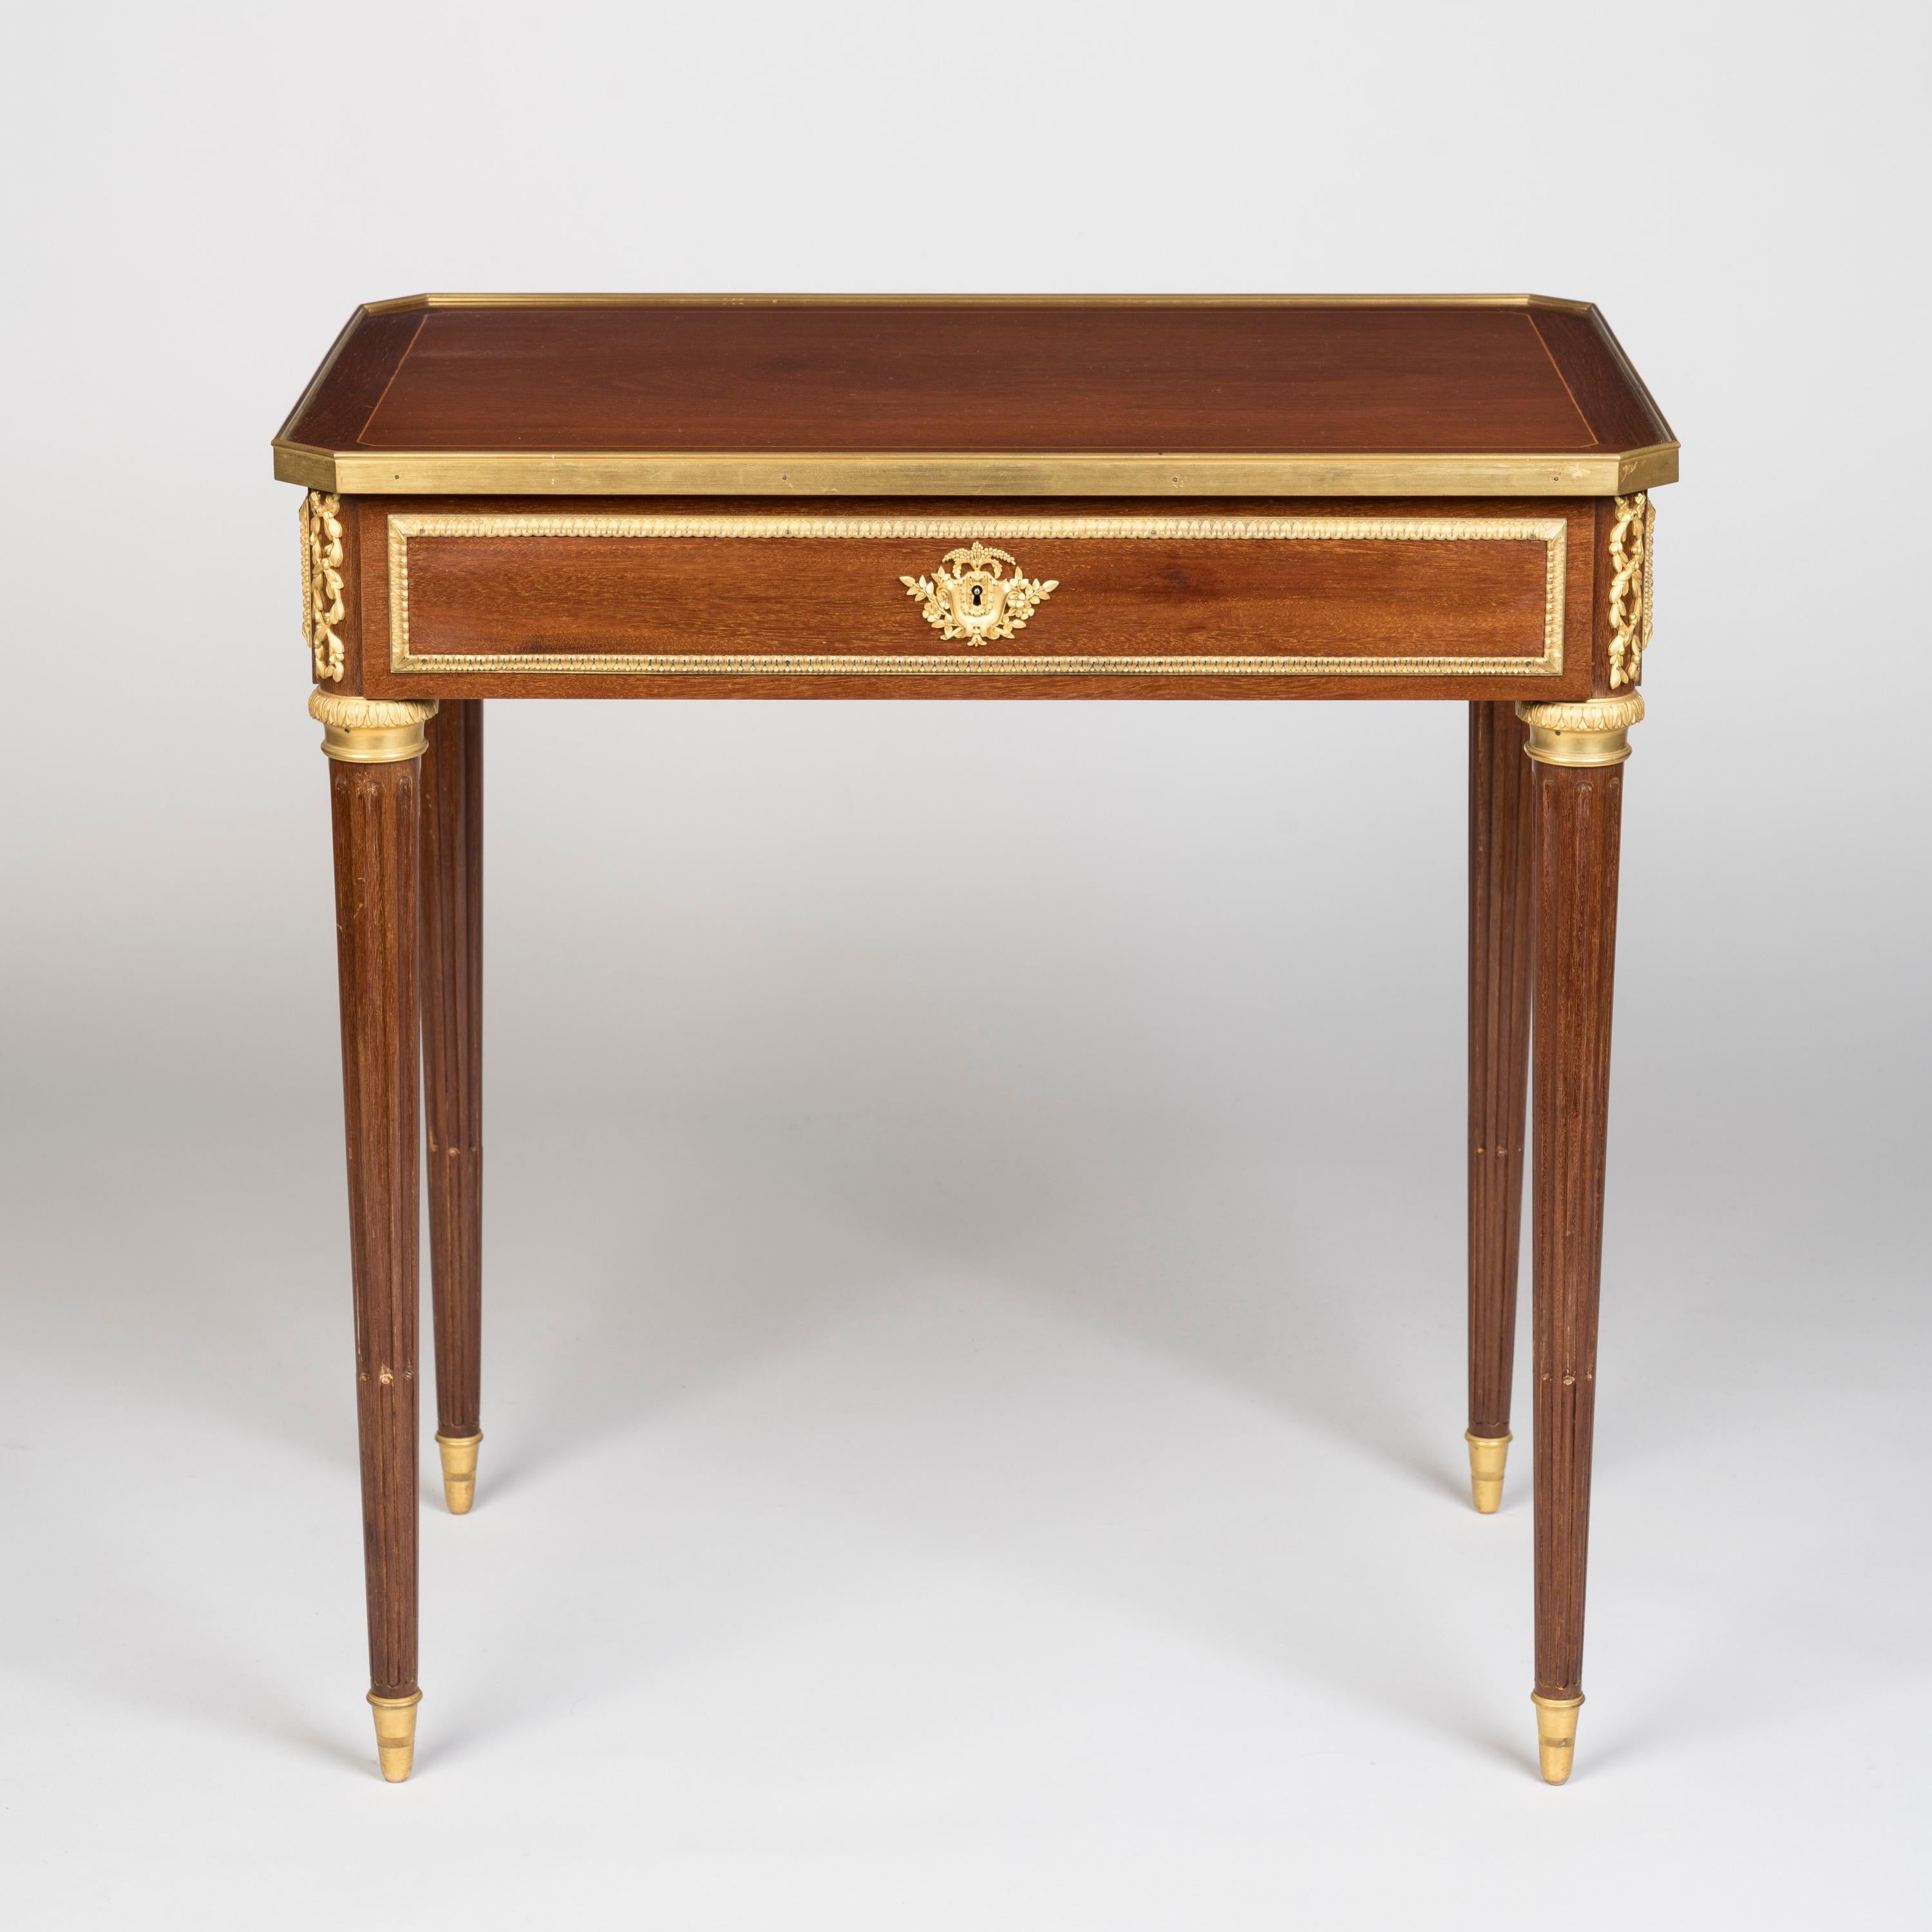 20th Century 19th Century French Belle Époque Table in the Louis XVI Style by Lexcellent For Sale